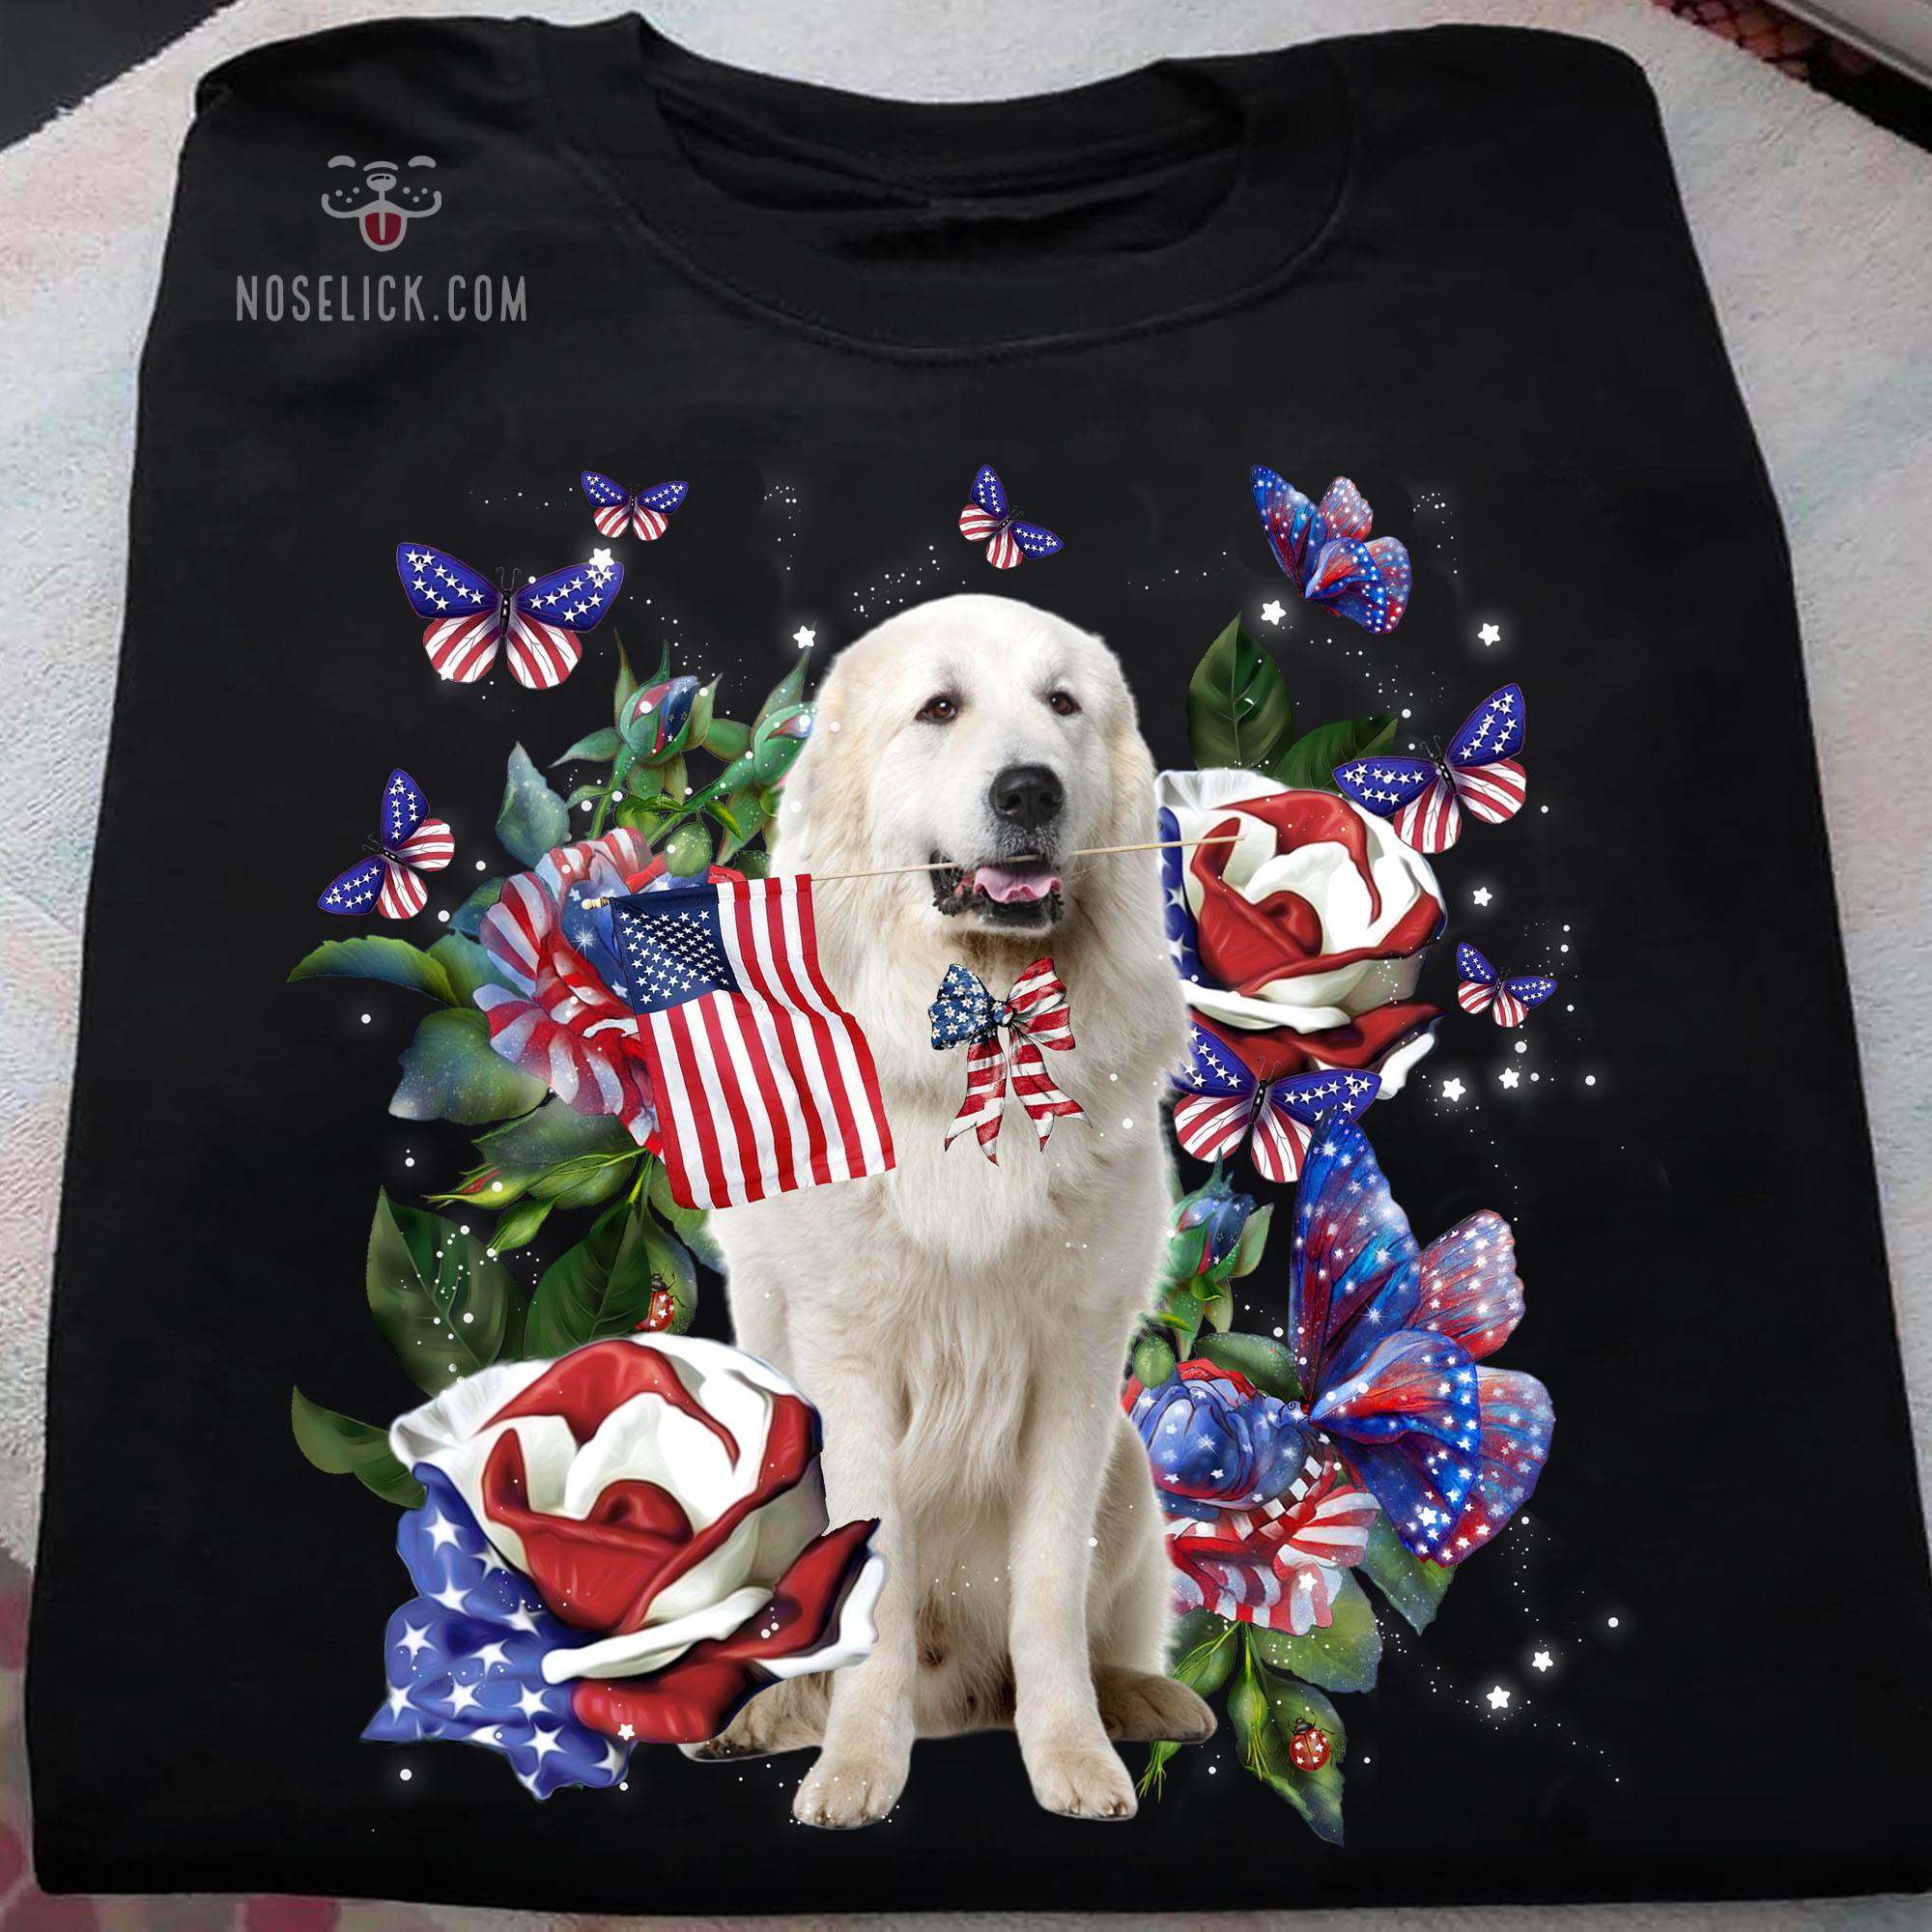 Golden dog and butterflies - American loves dogs, gift for dog person